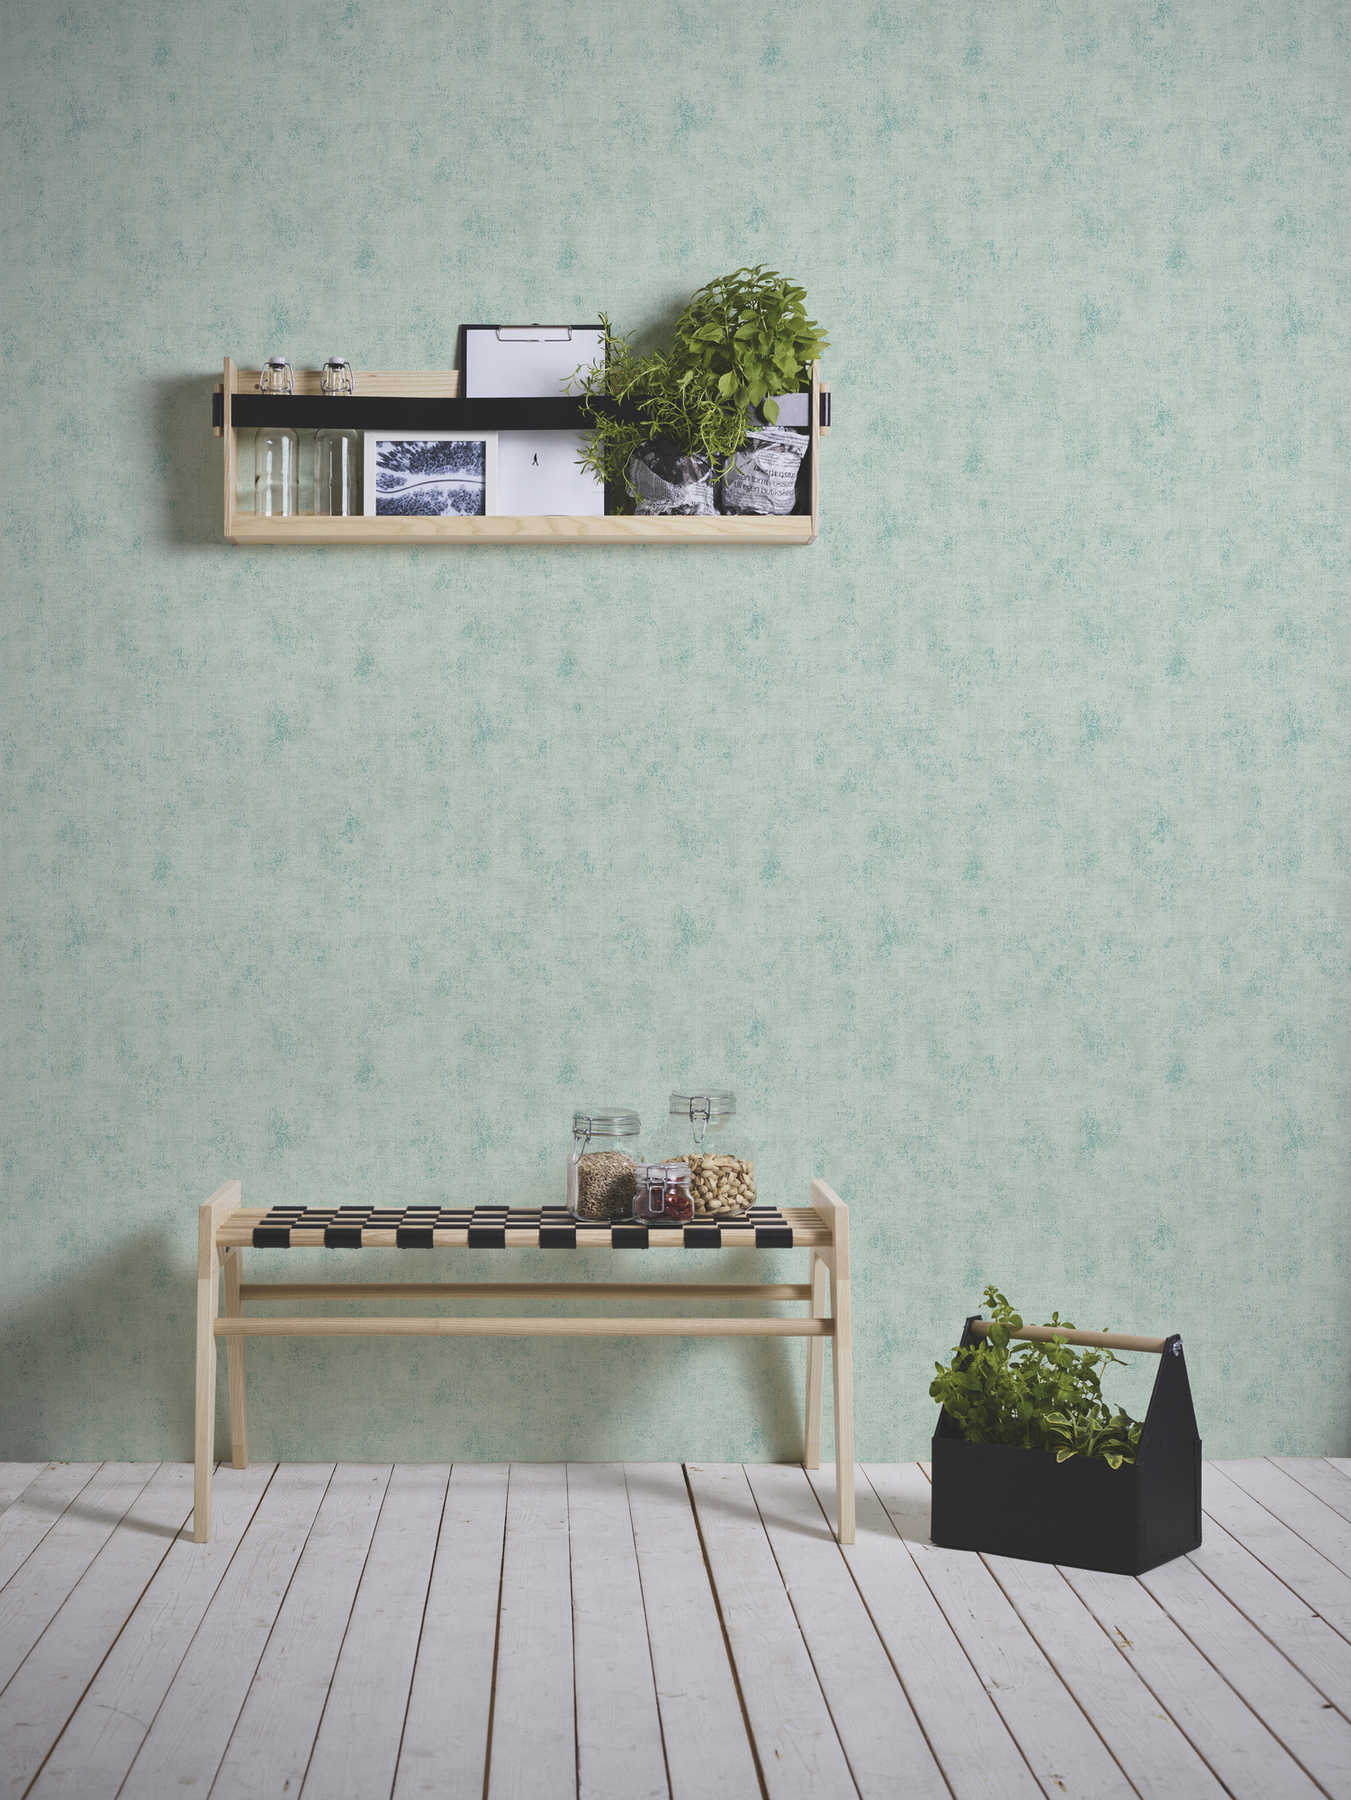             Plain wallpaper with discreet structure look - green
        